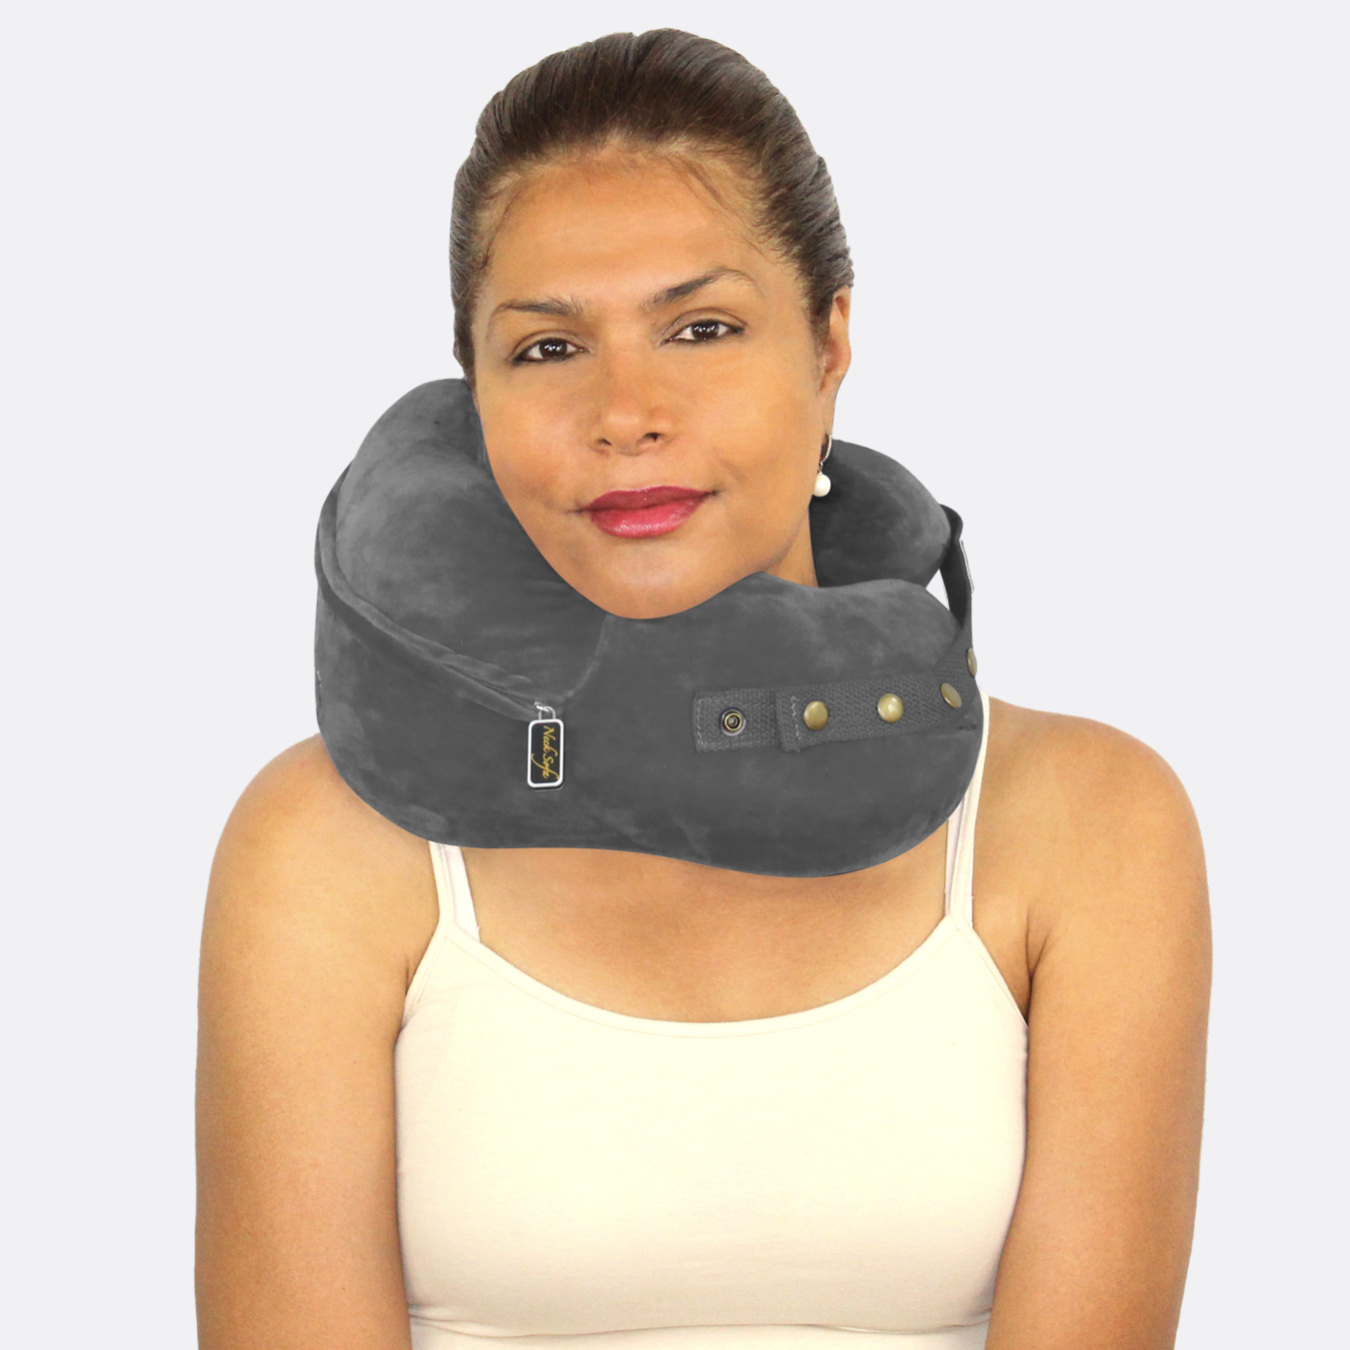 Neck Sofa® Collar support the head and neck.